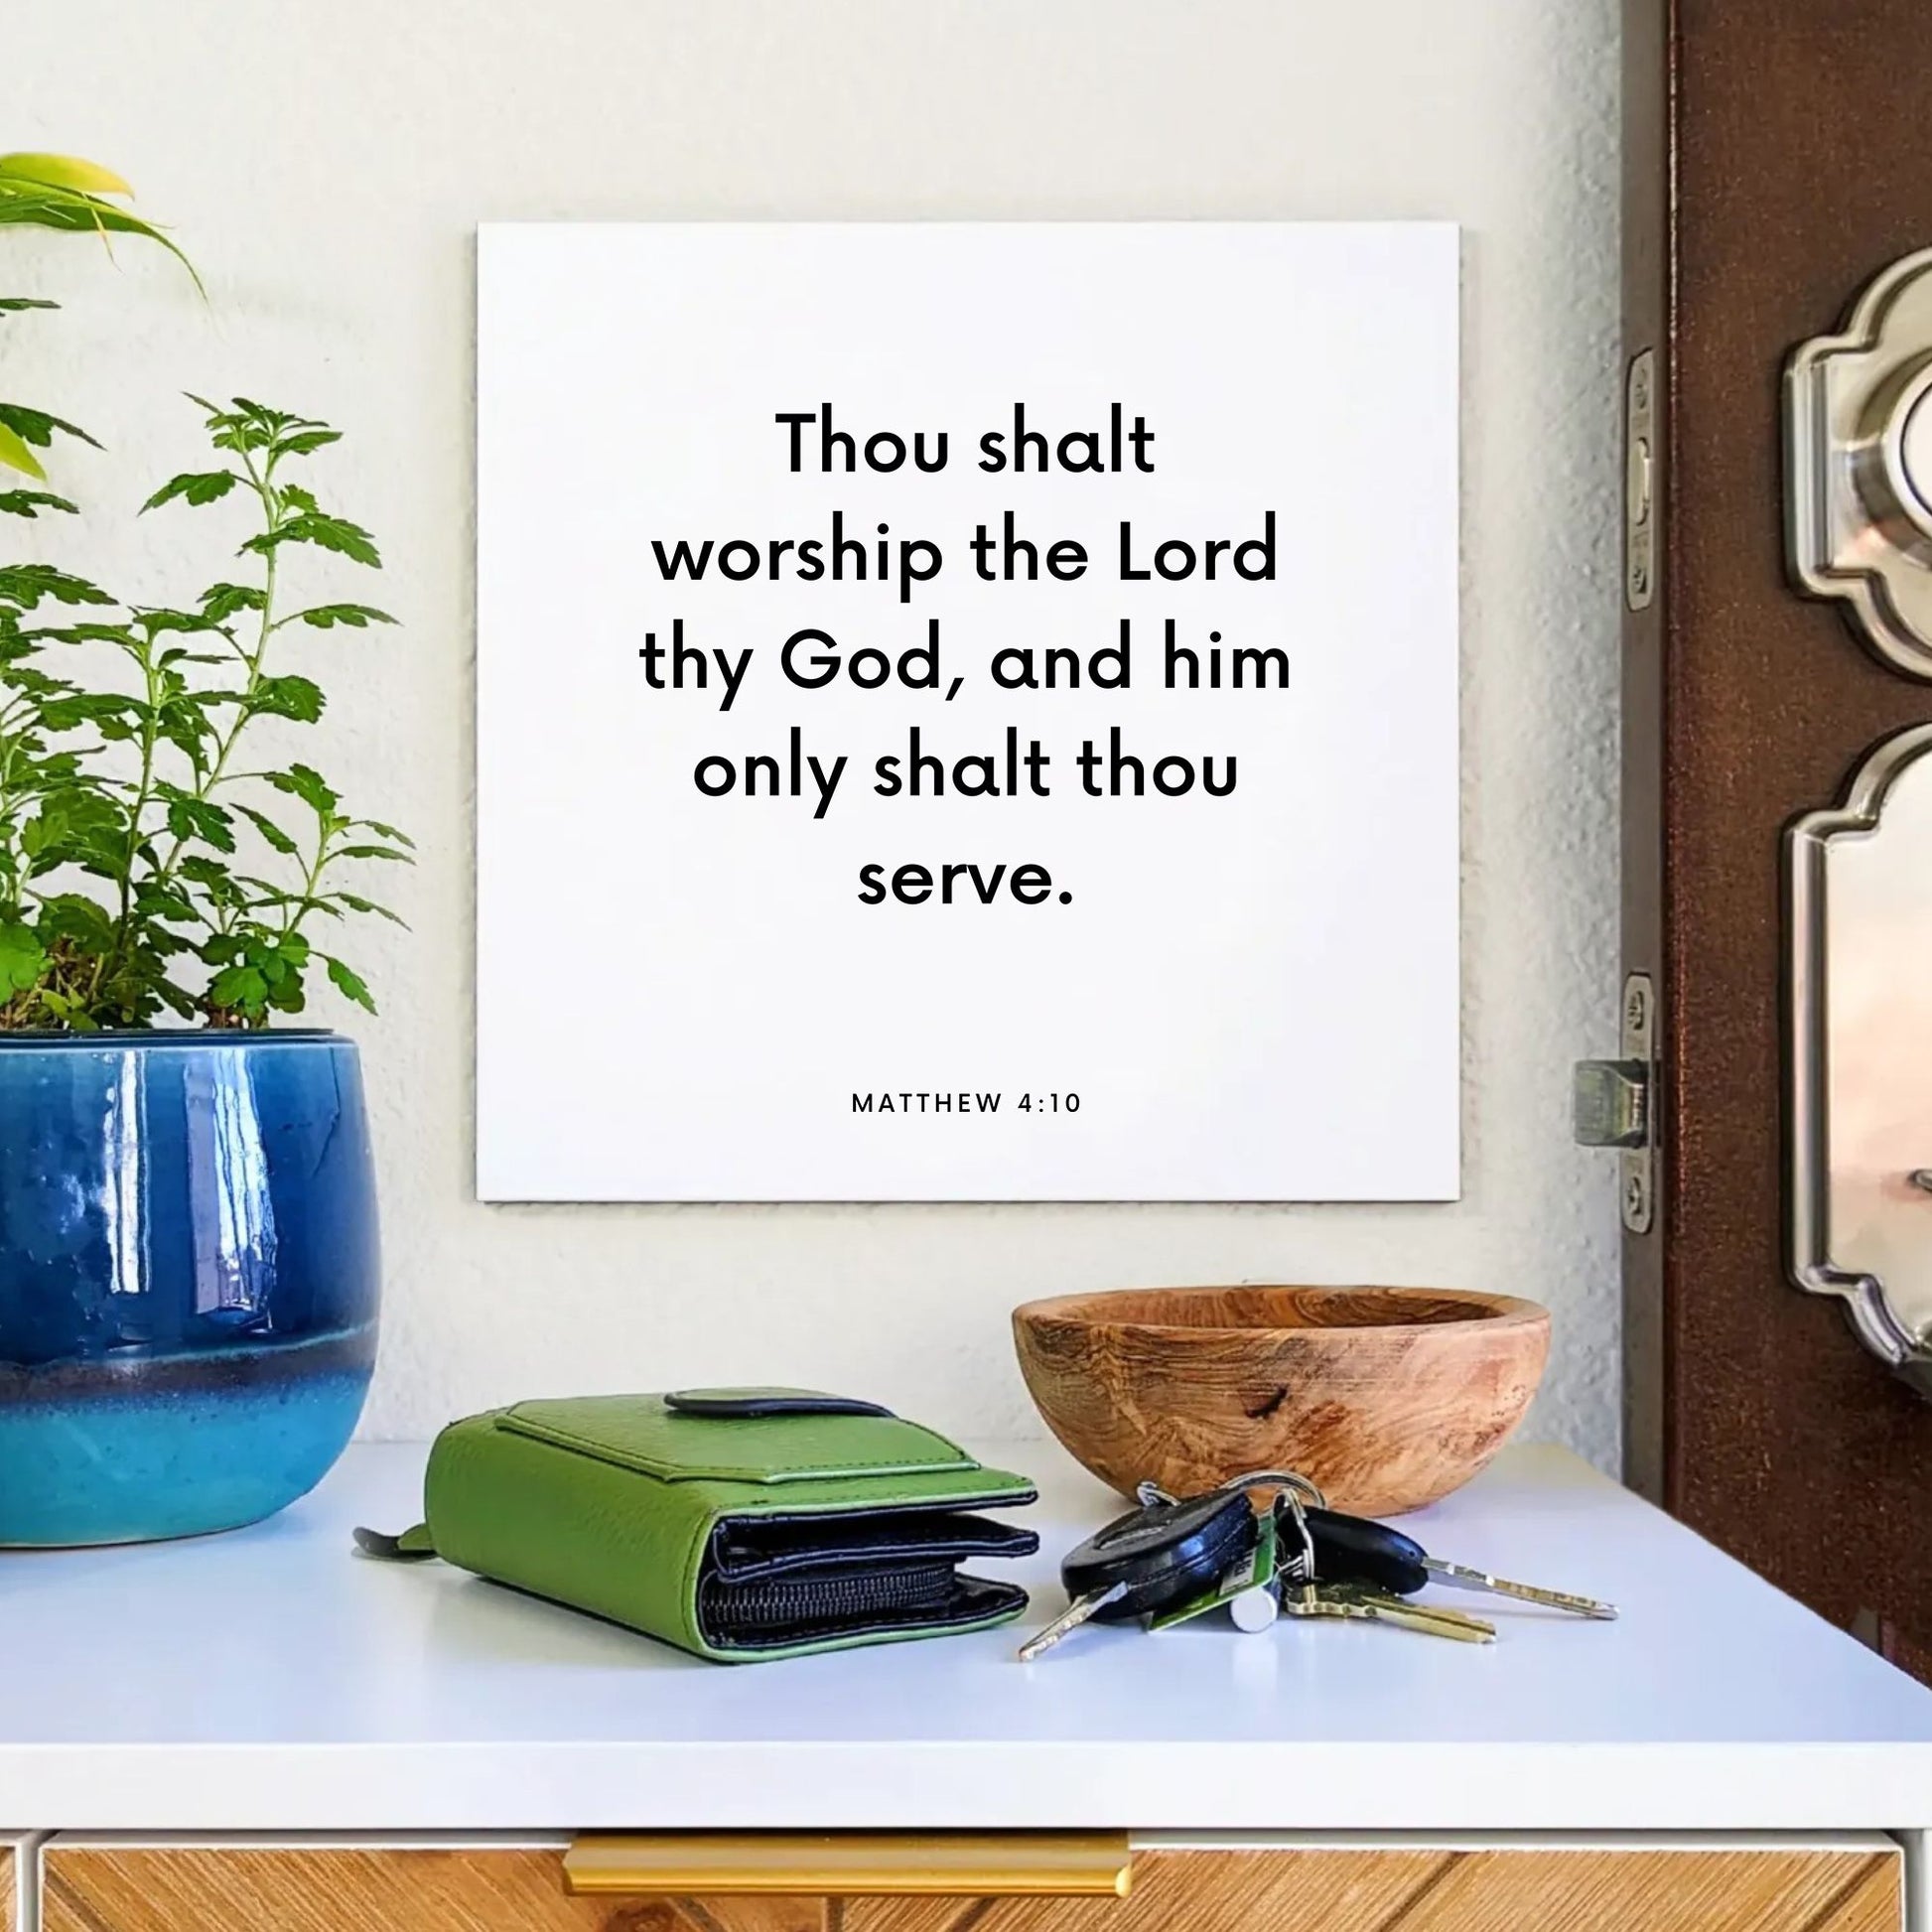 Entryway mouting of the scripture tile for Matthew 4:10 - "Thou shalt worship the Lord thy God"